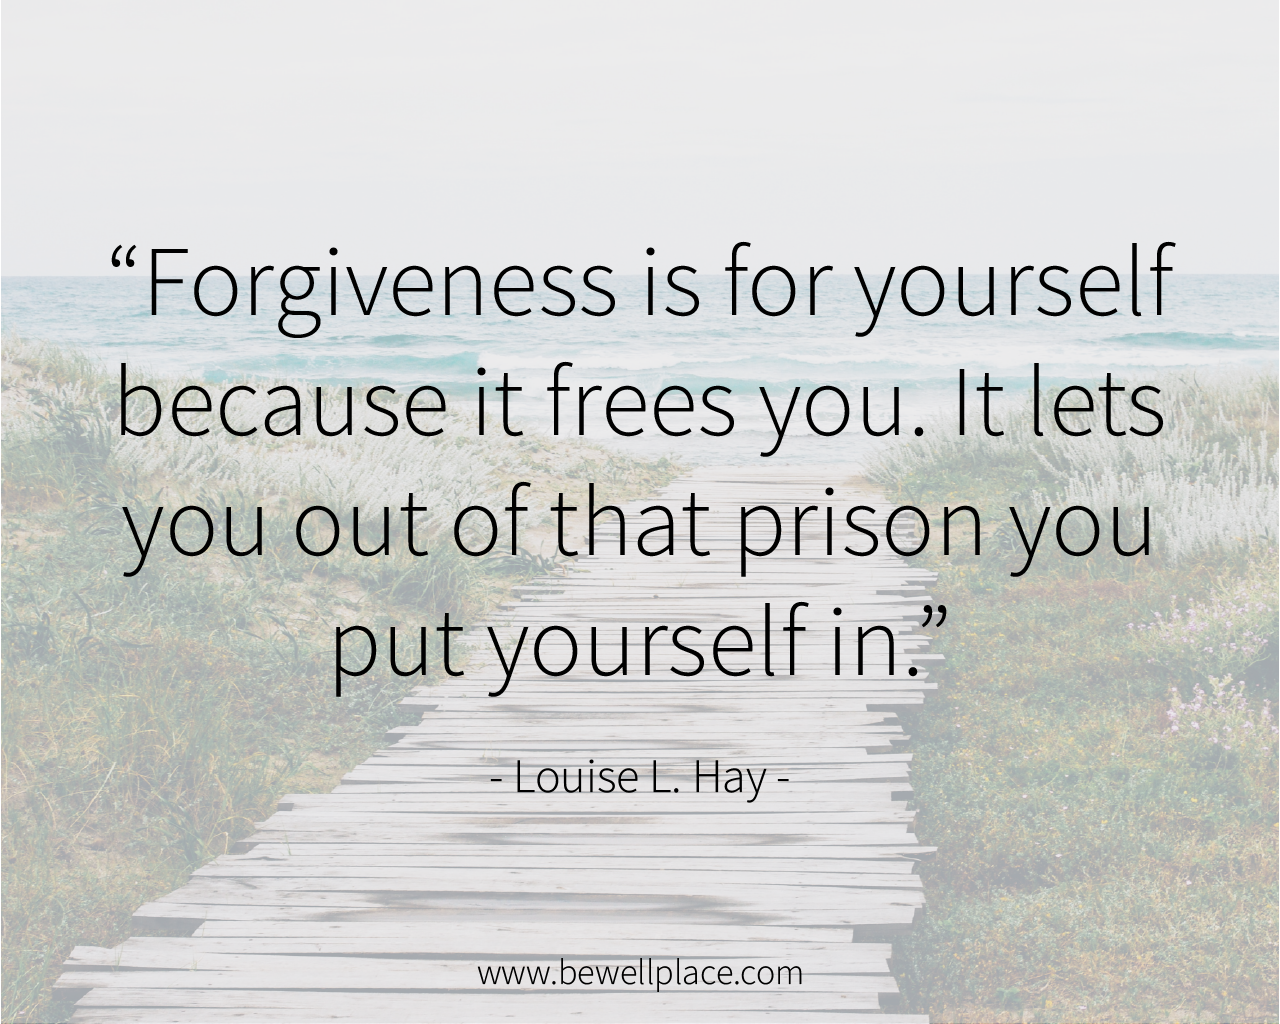 Life Transformation Starts with Self-Forgiveness